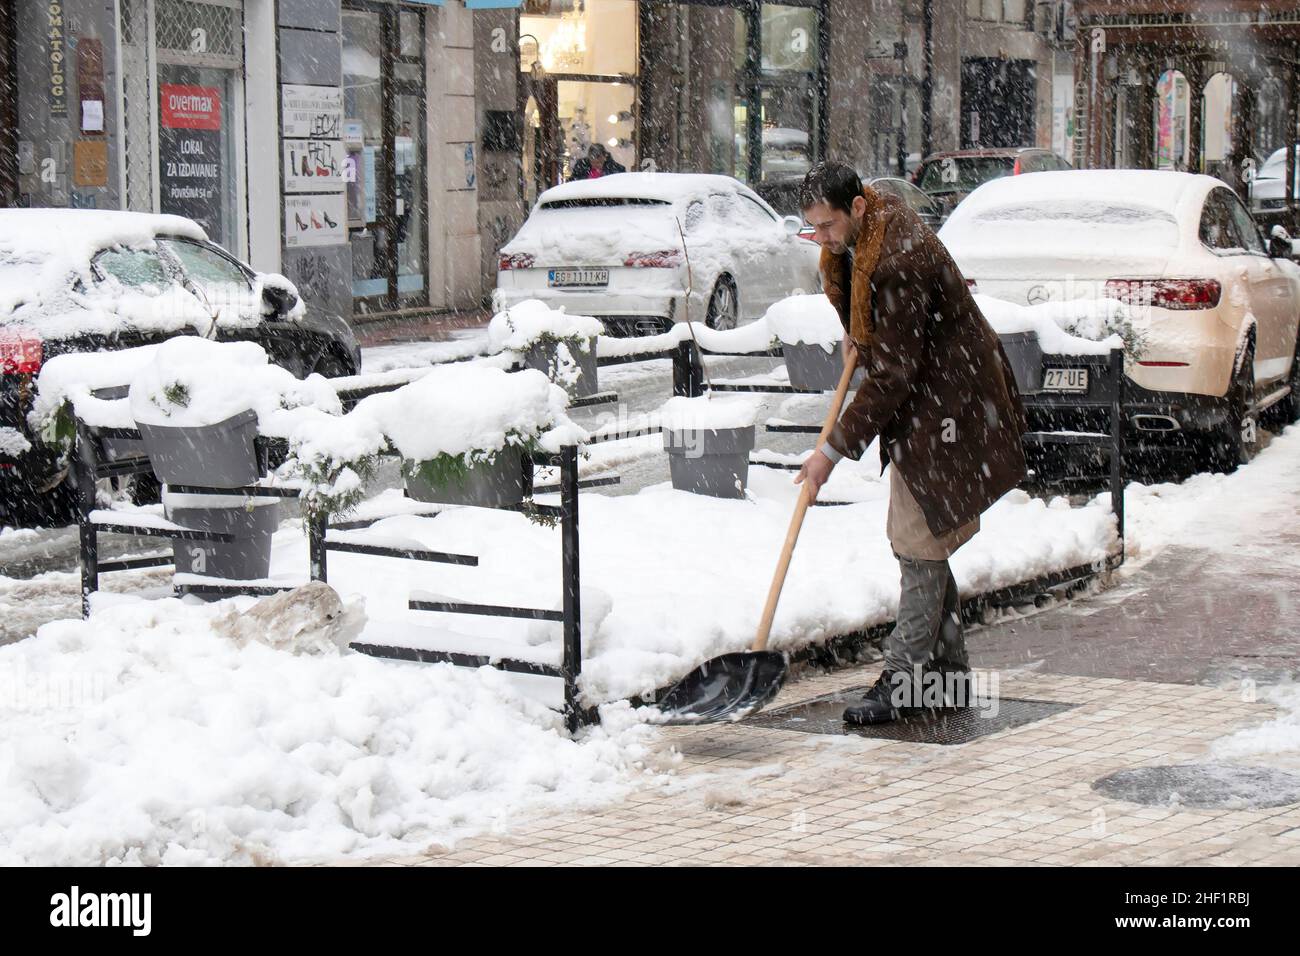 Belgrade, Serbia - January 11, 2022: One man using shovel for removing snow from city sidewalk in front of the coffee bar Stock Photo